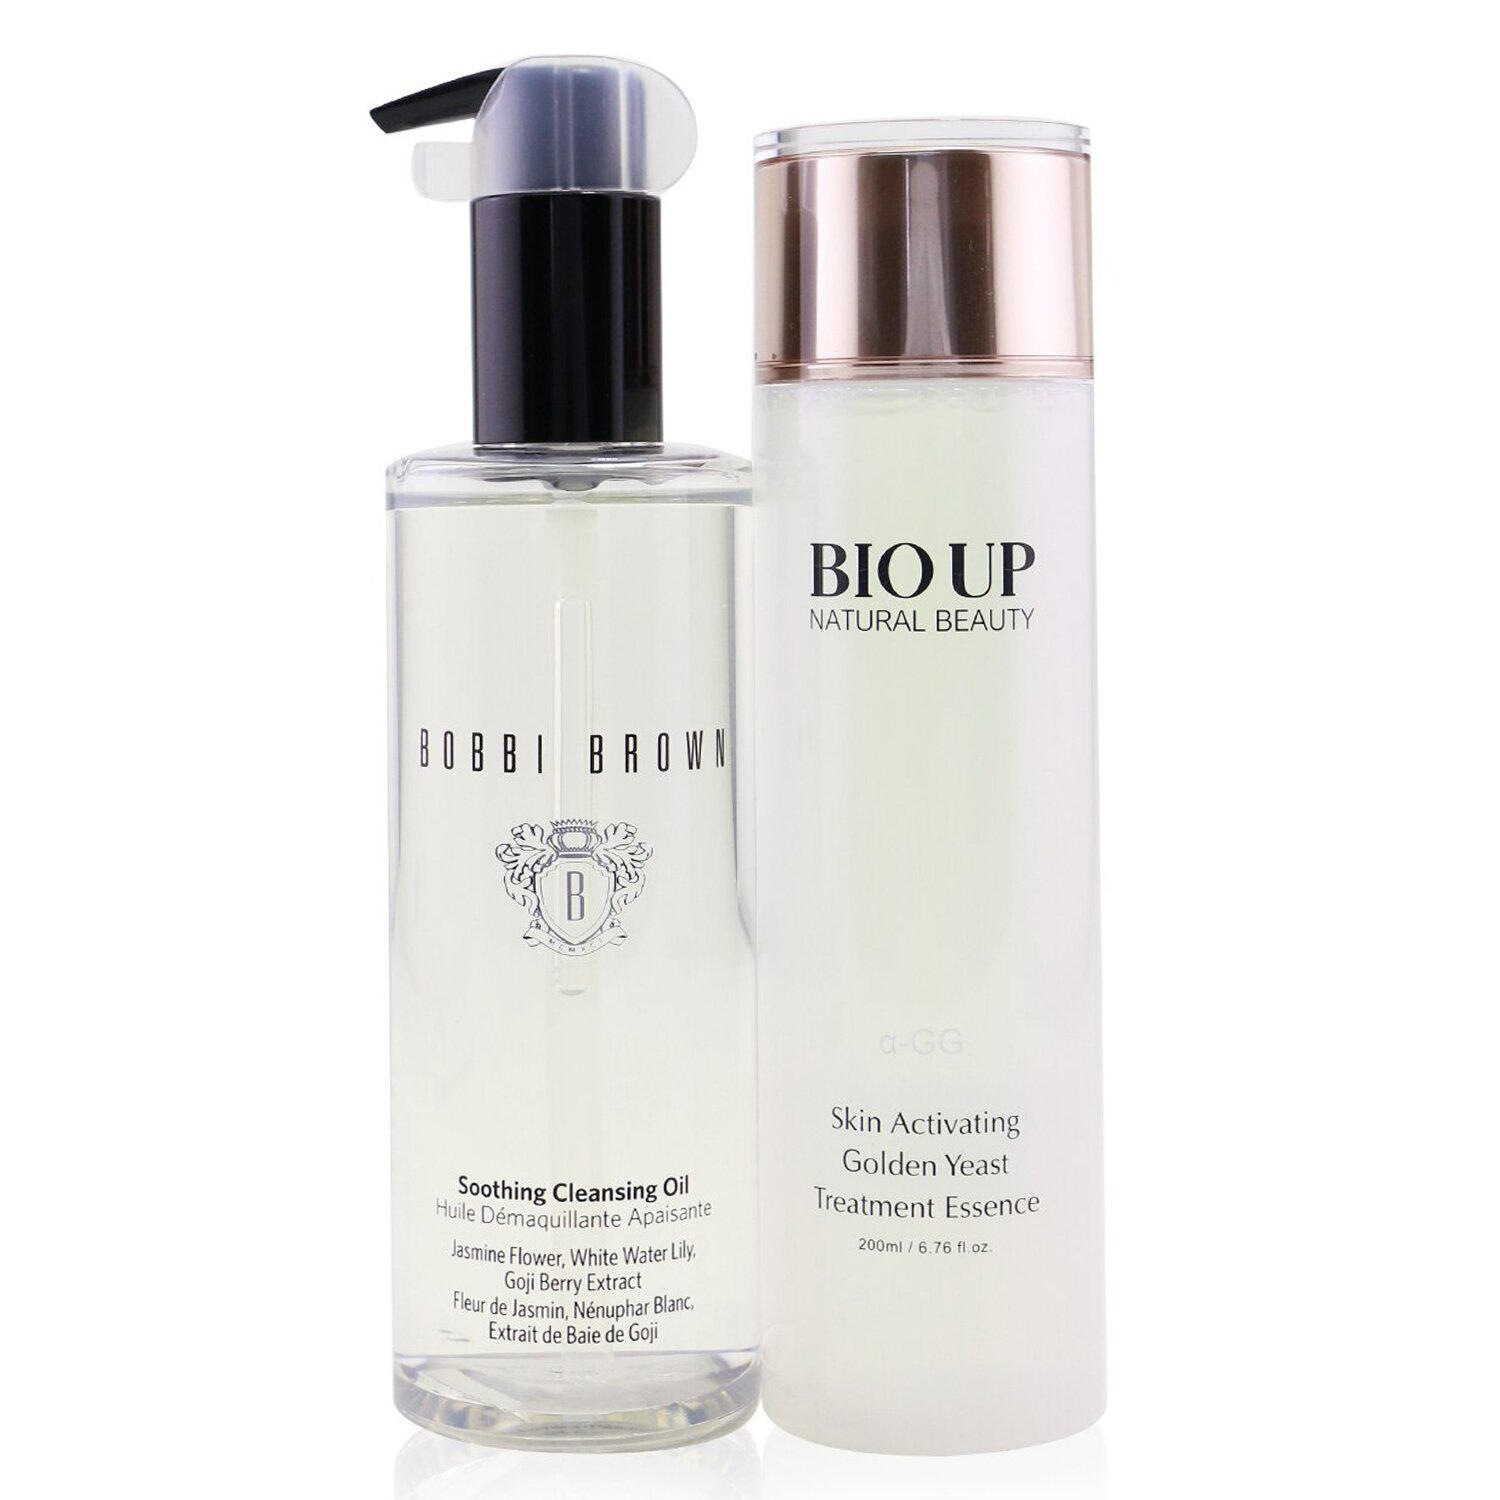 Bobbi Brown Soothing Cleansing Oil (Free: Natural Beauty BIO UP Treatment Essence 200ml) 2pcs